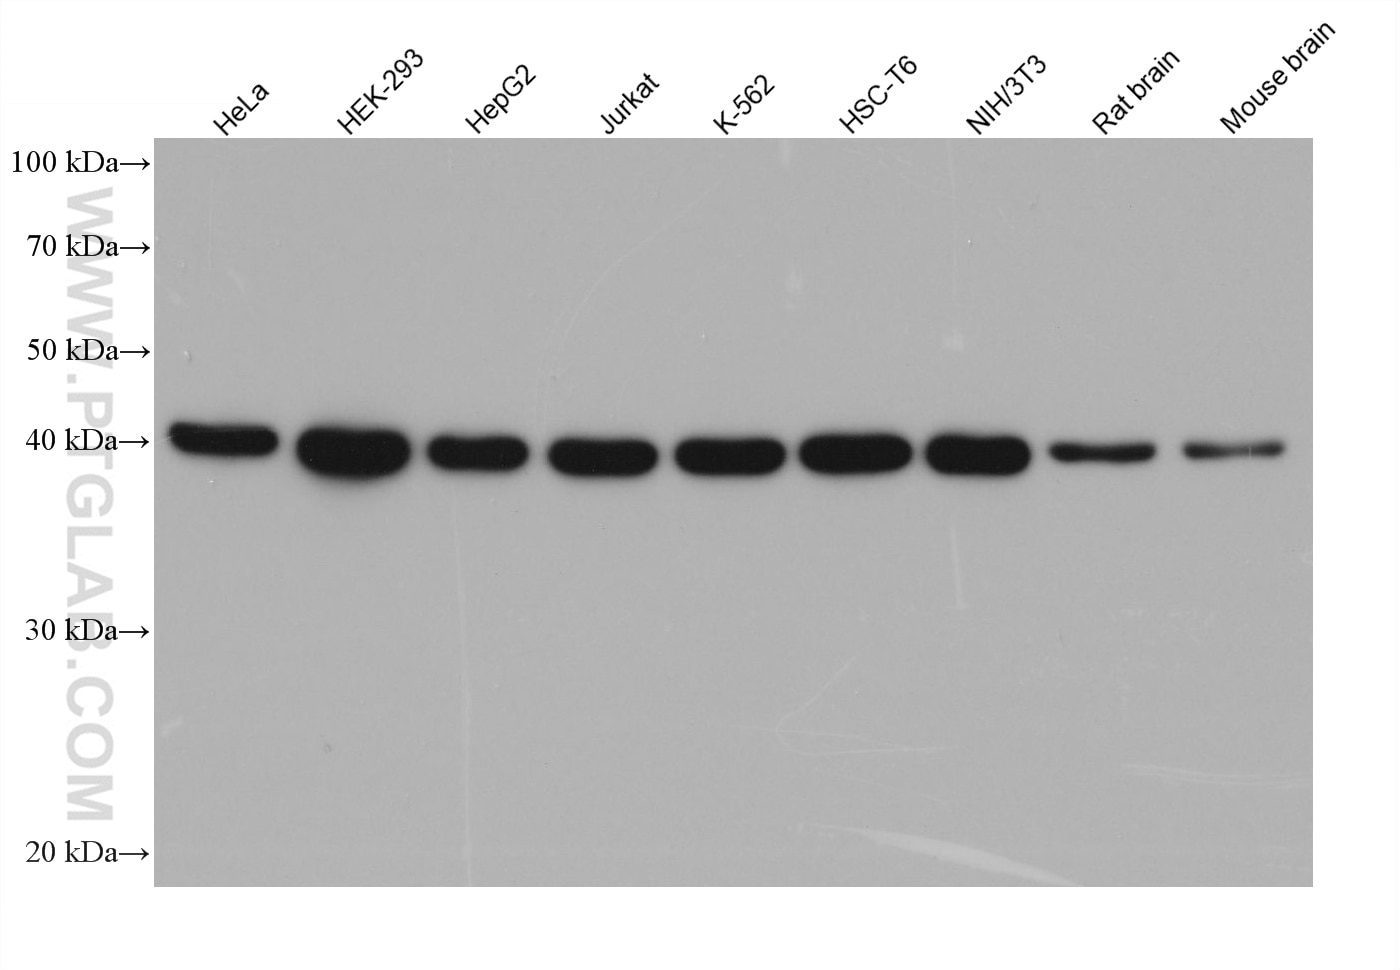 Various lysates were subjected to SDS-PAGE followed by western blot with rabbit anti-TDP43 recombinant antibody (80001-1-RR) at dilution of 1:20000. Multi-rAb HRP-Goat Anti-Rabbit Recombinant Secondary Antibody (H+L) (RGAR001) was used at 1:20000 for detection. 